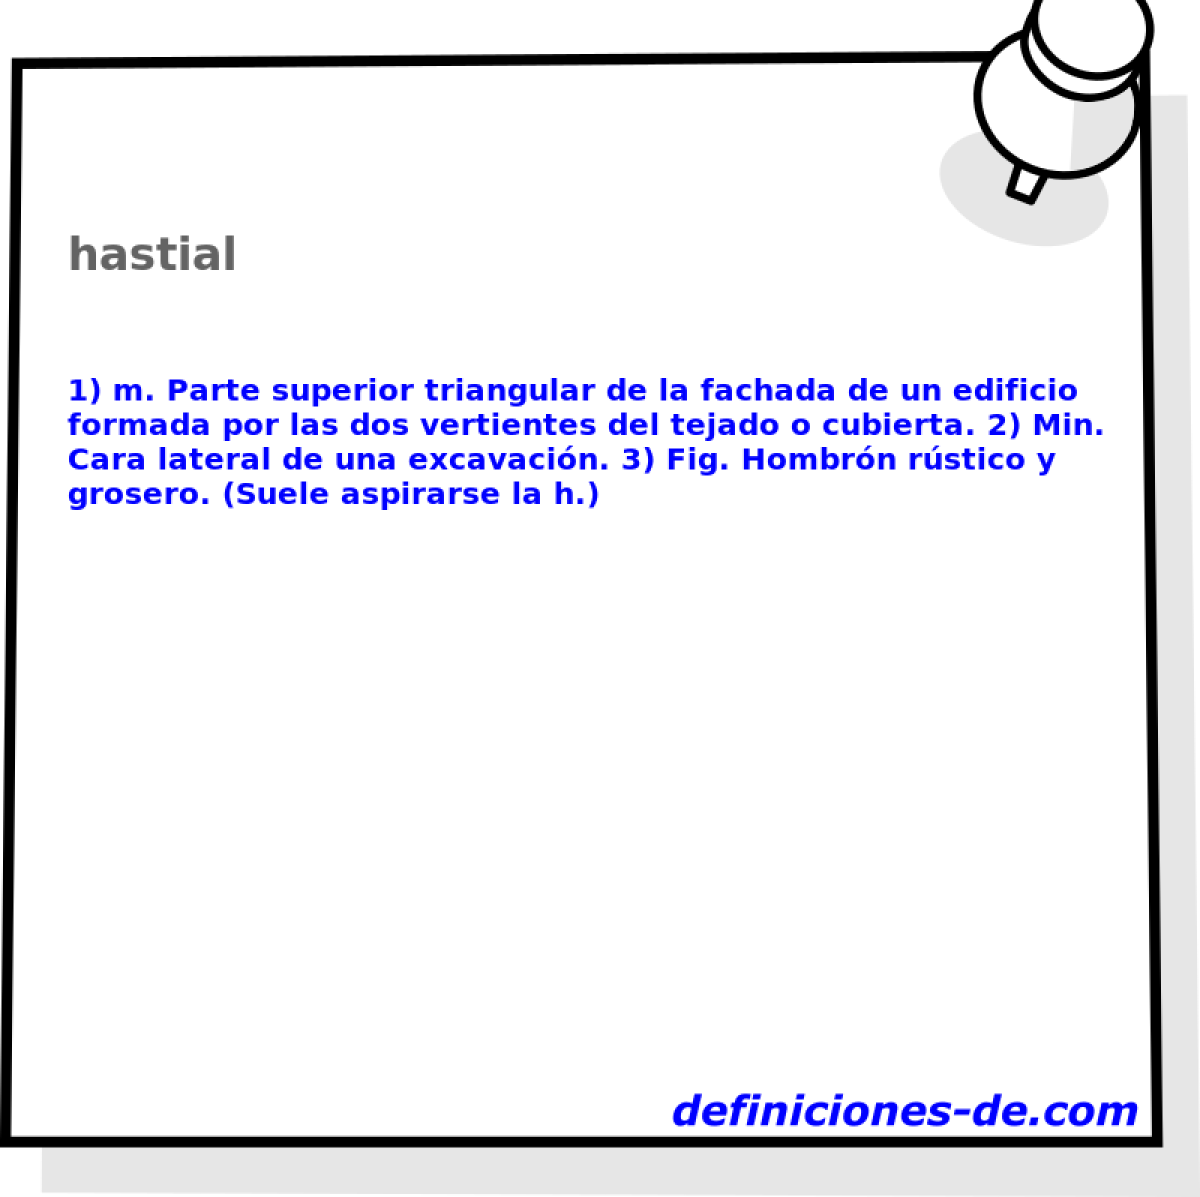 hastial 